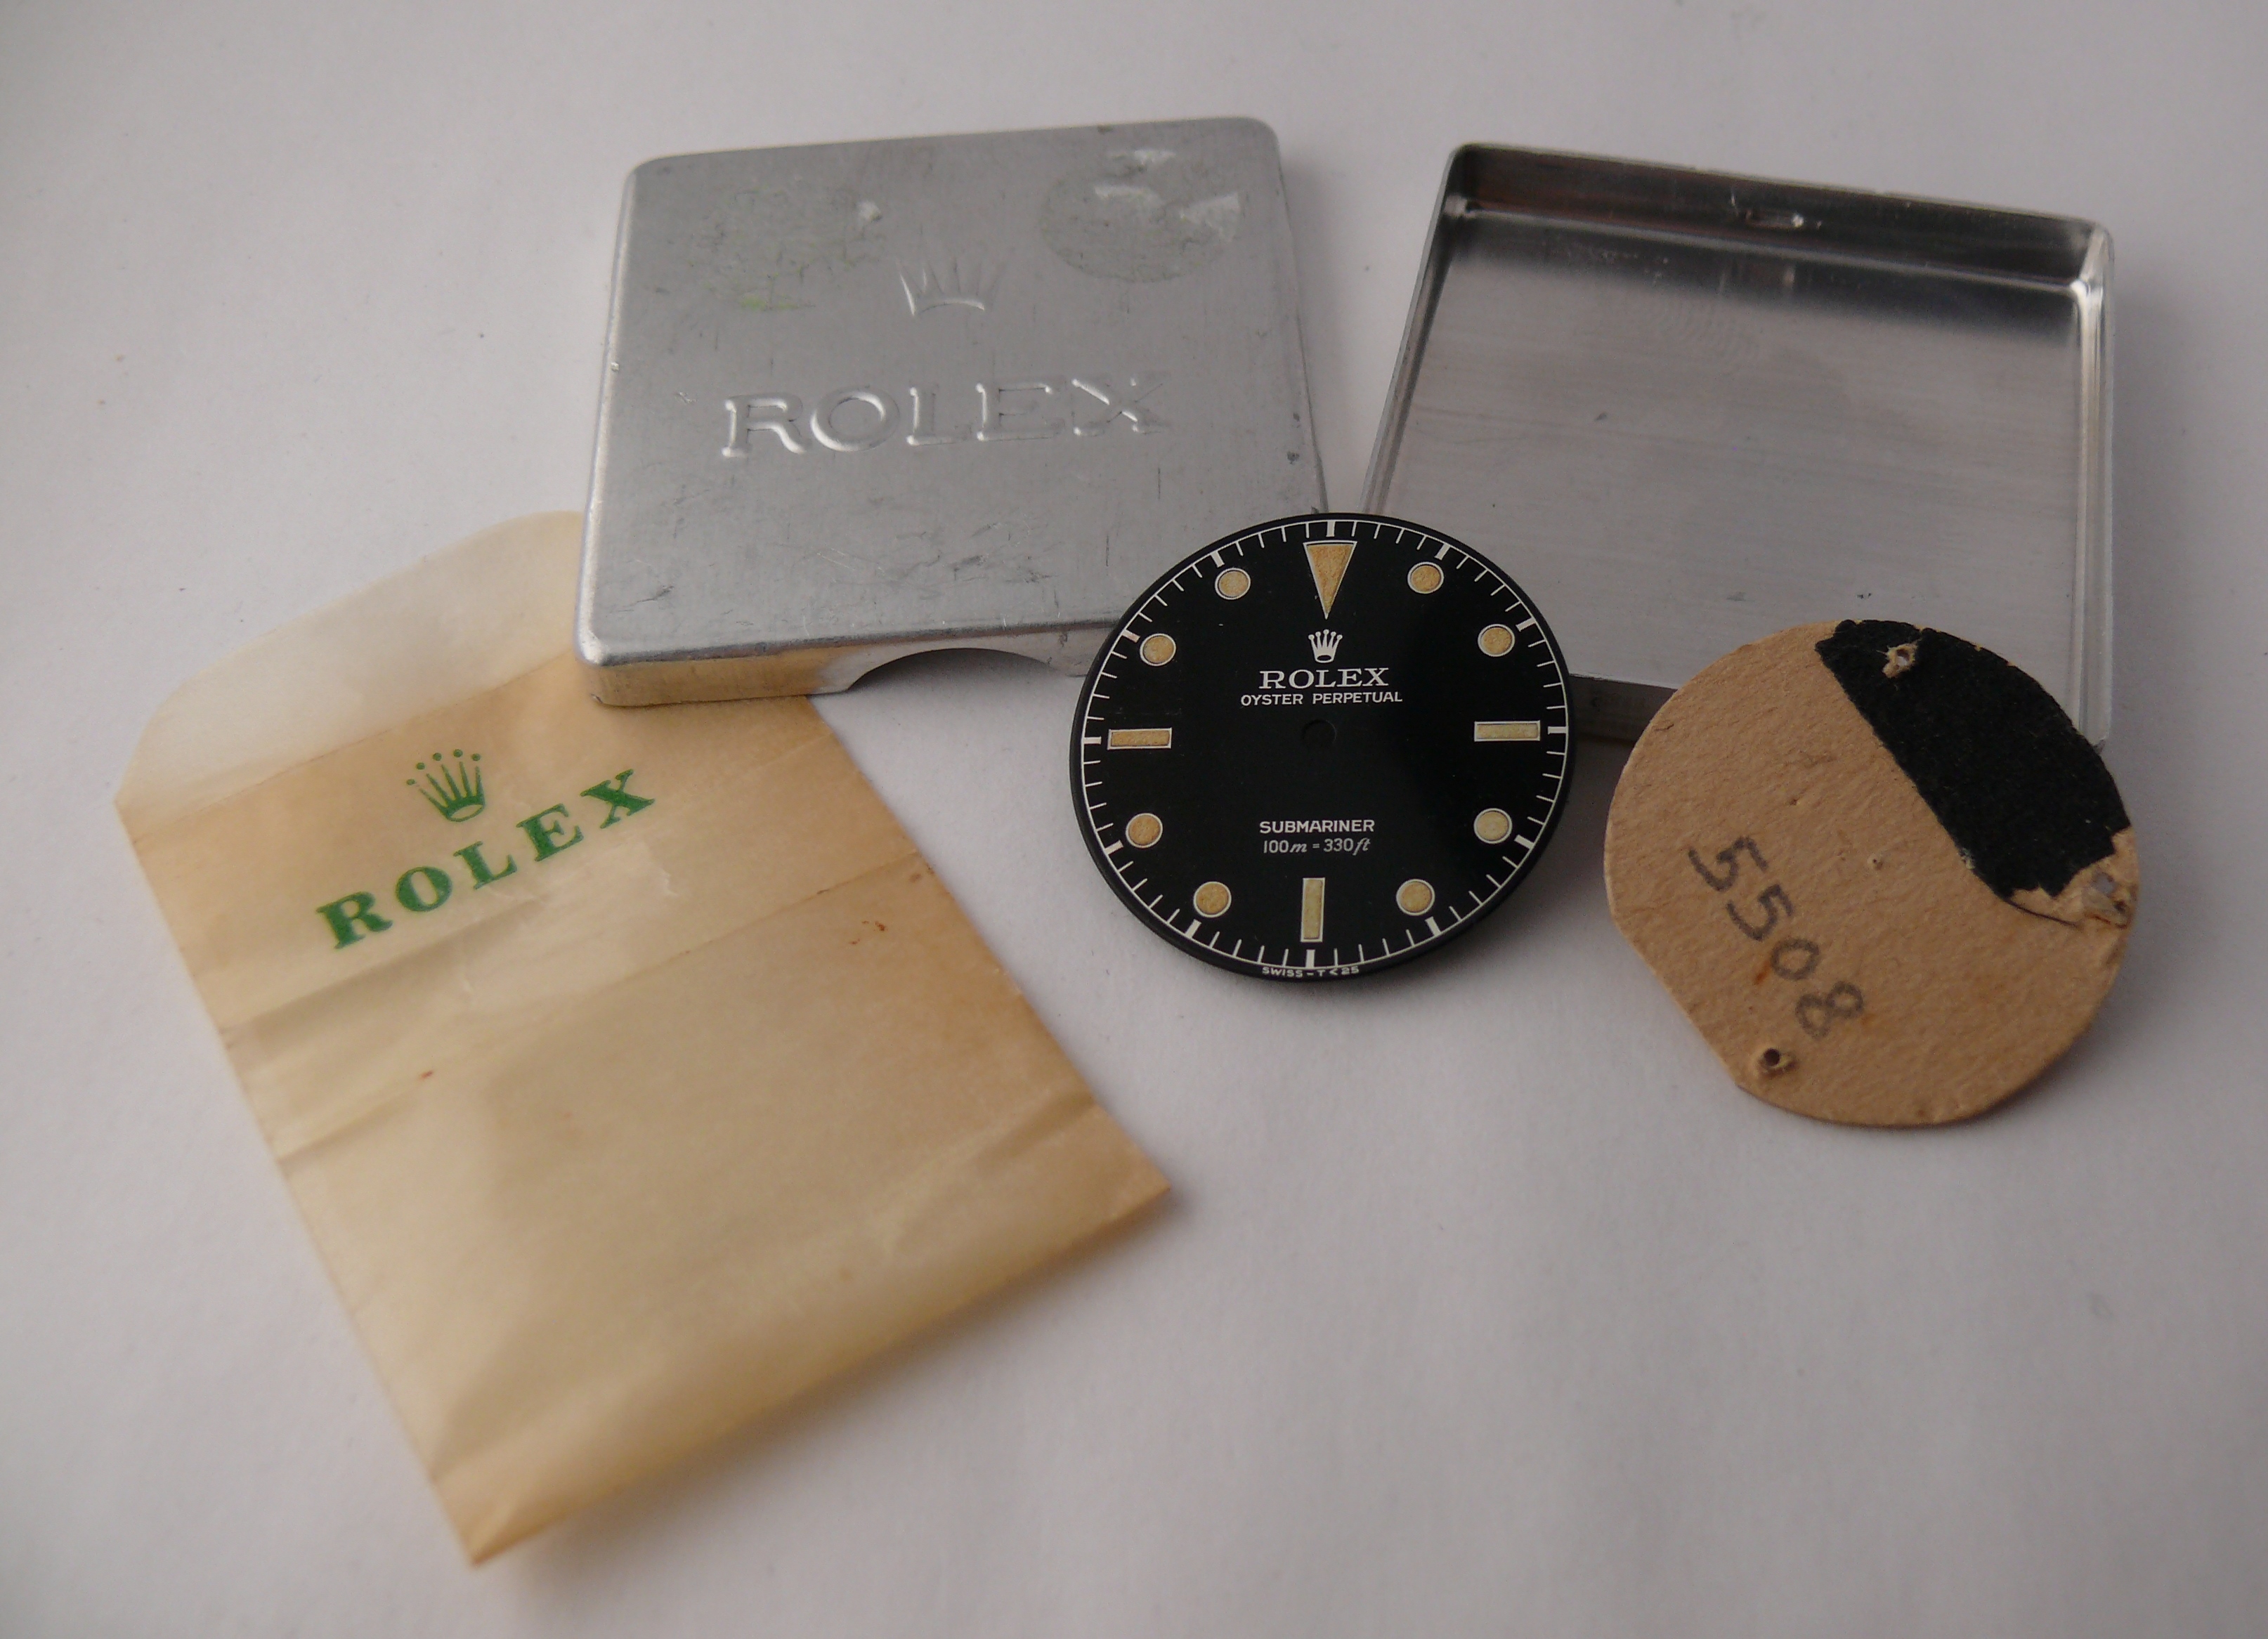 Vintage rolex submariner James Bond 5508 dial, gilt gloss early service dial - Image 6 of 8